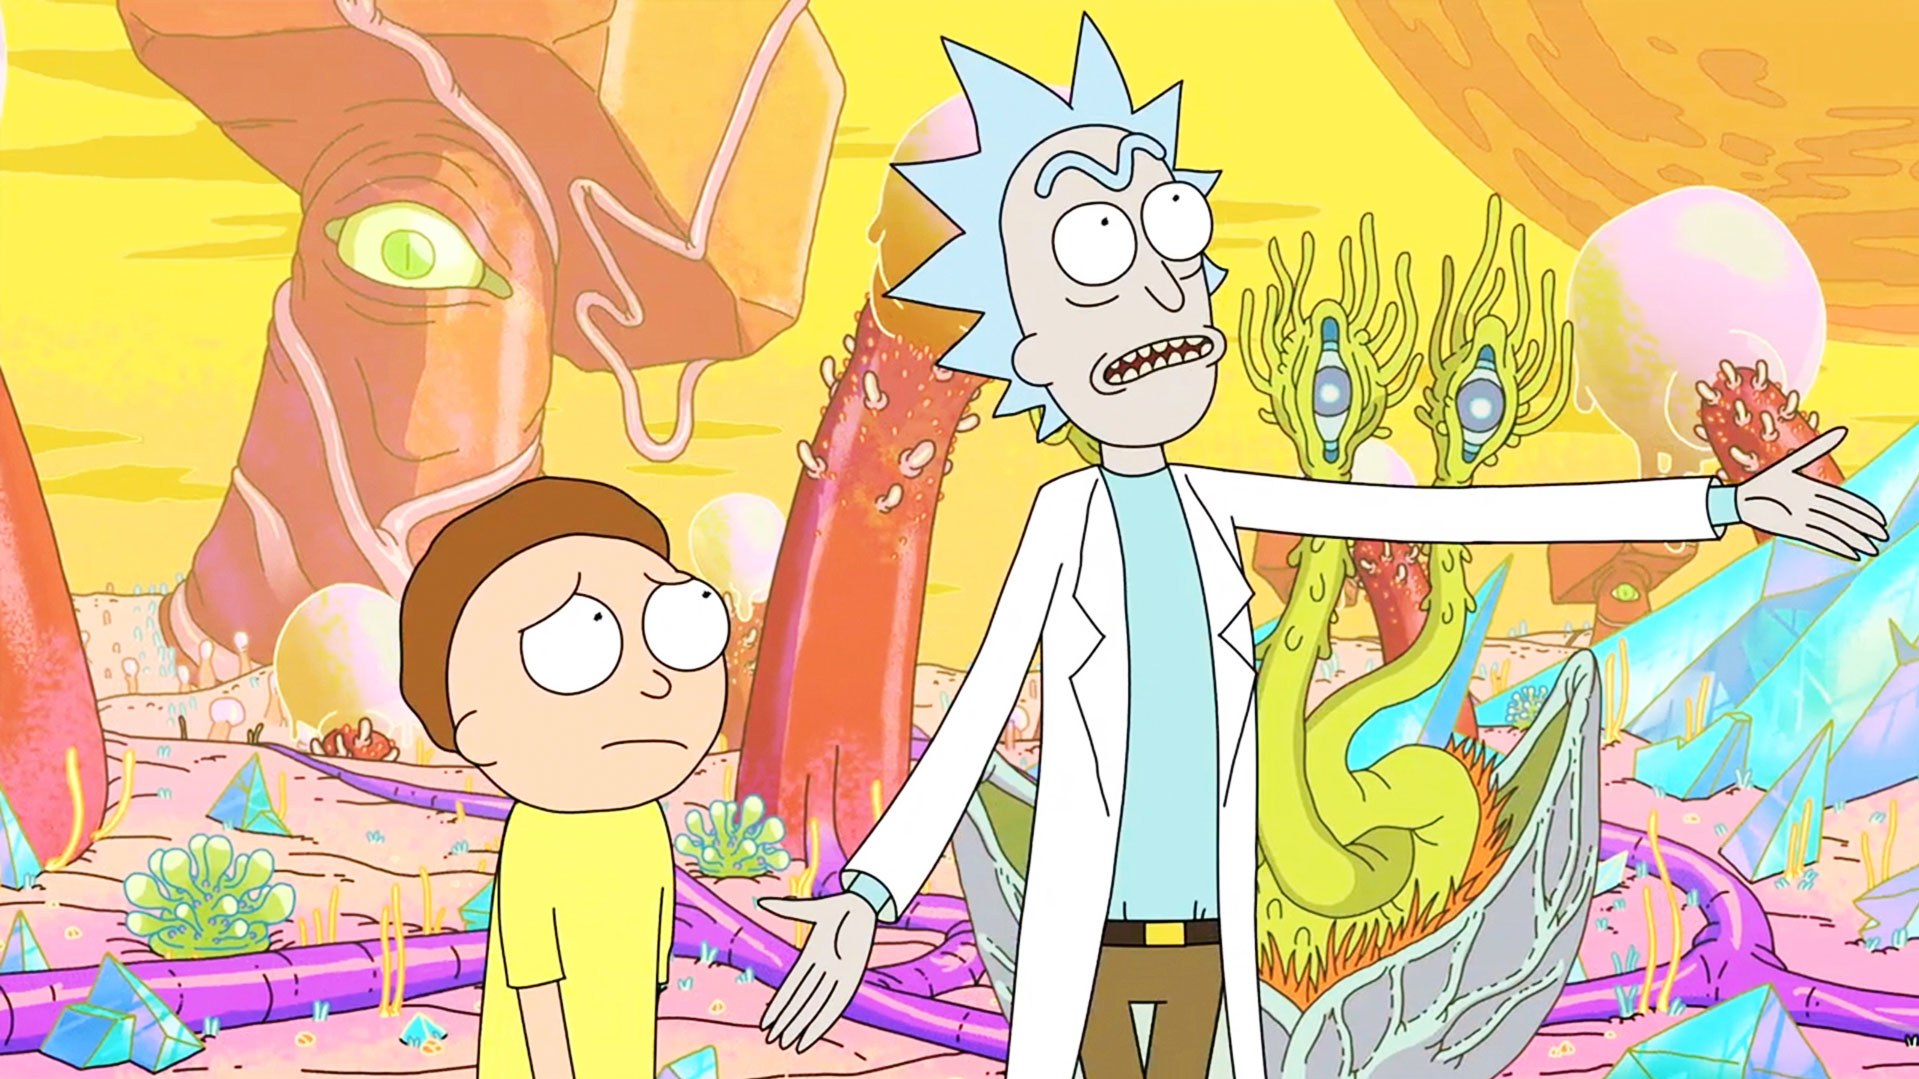 Rick and Morty season 4 release date trailer game update